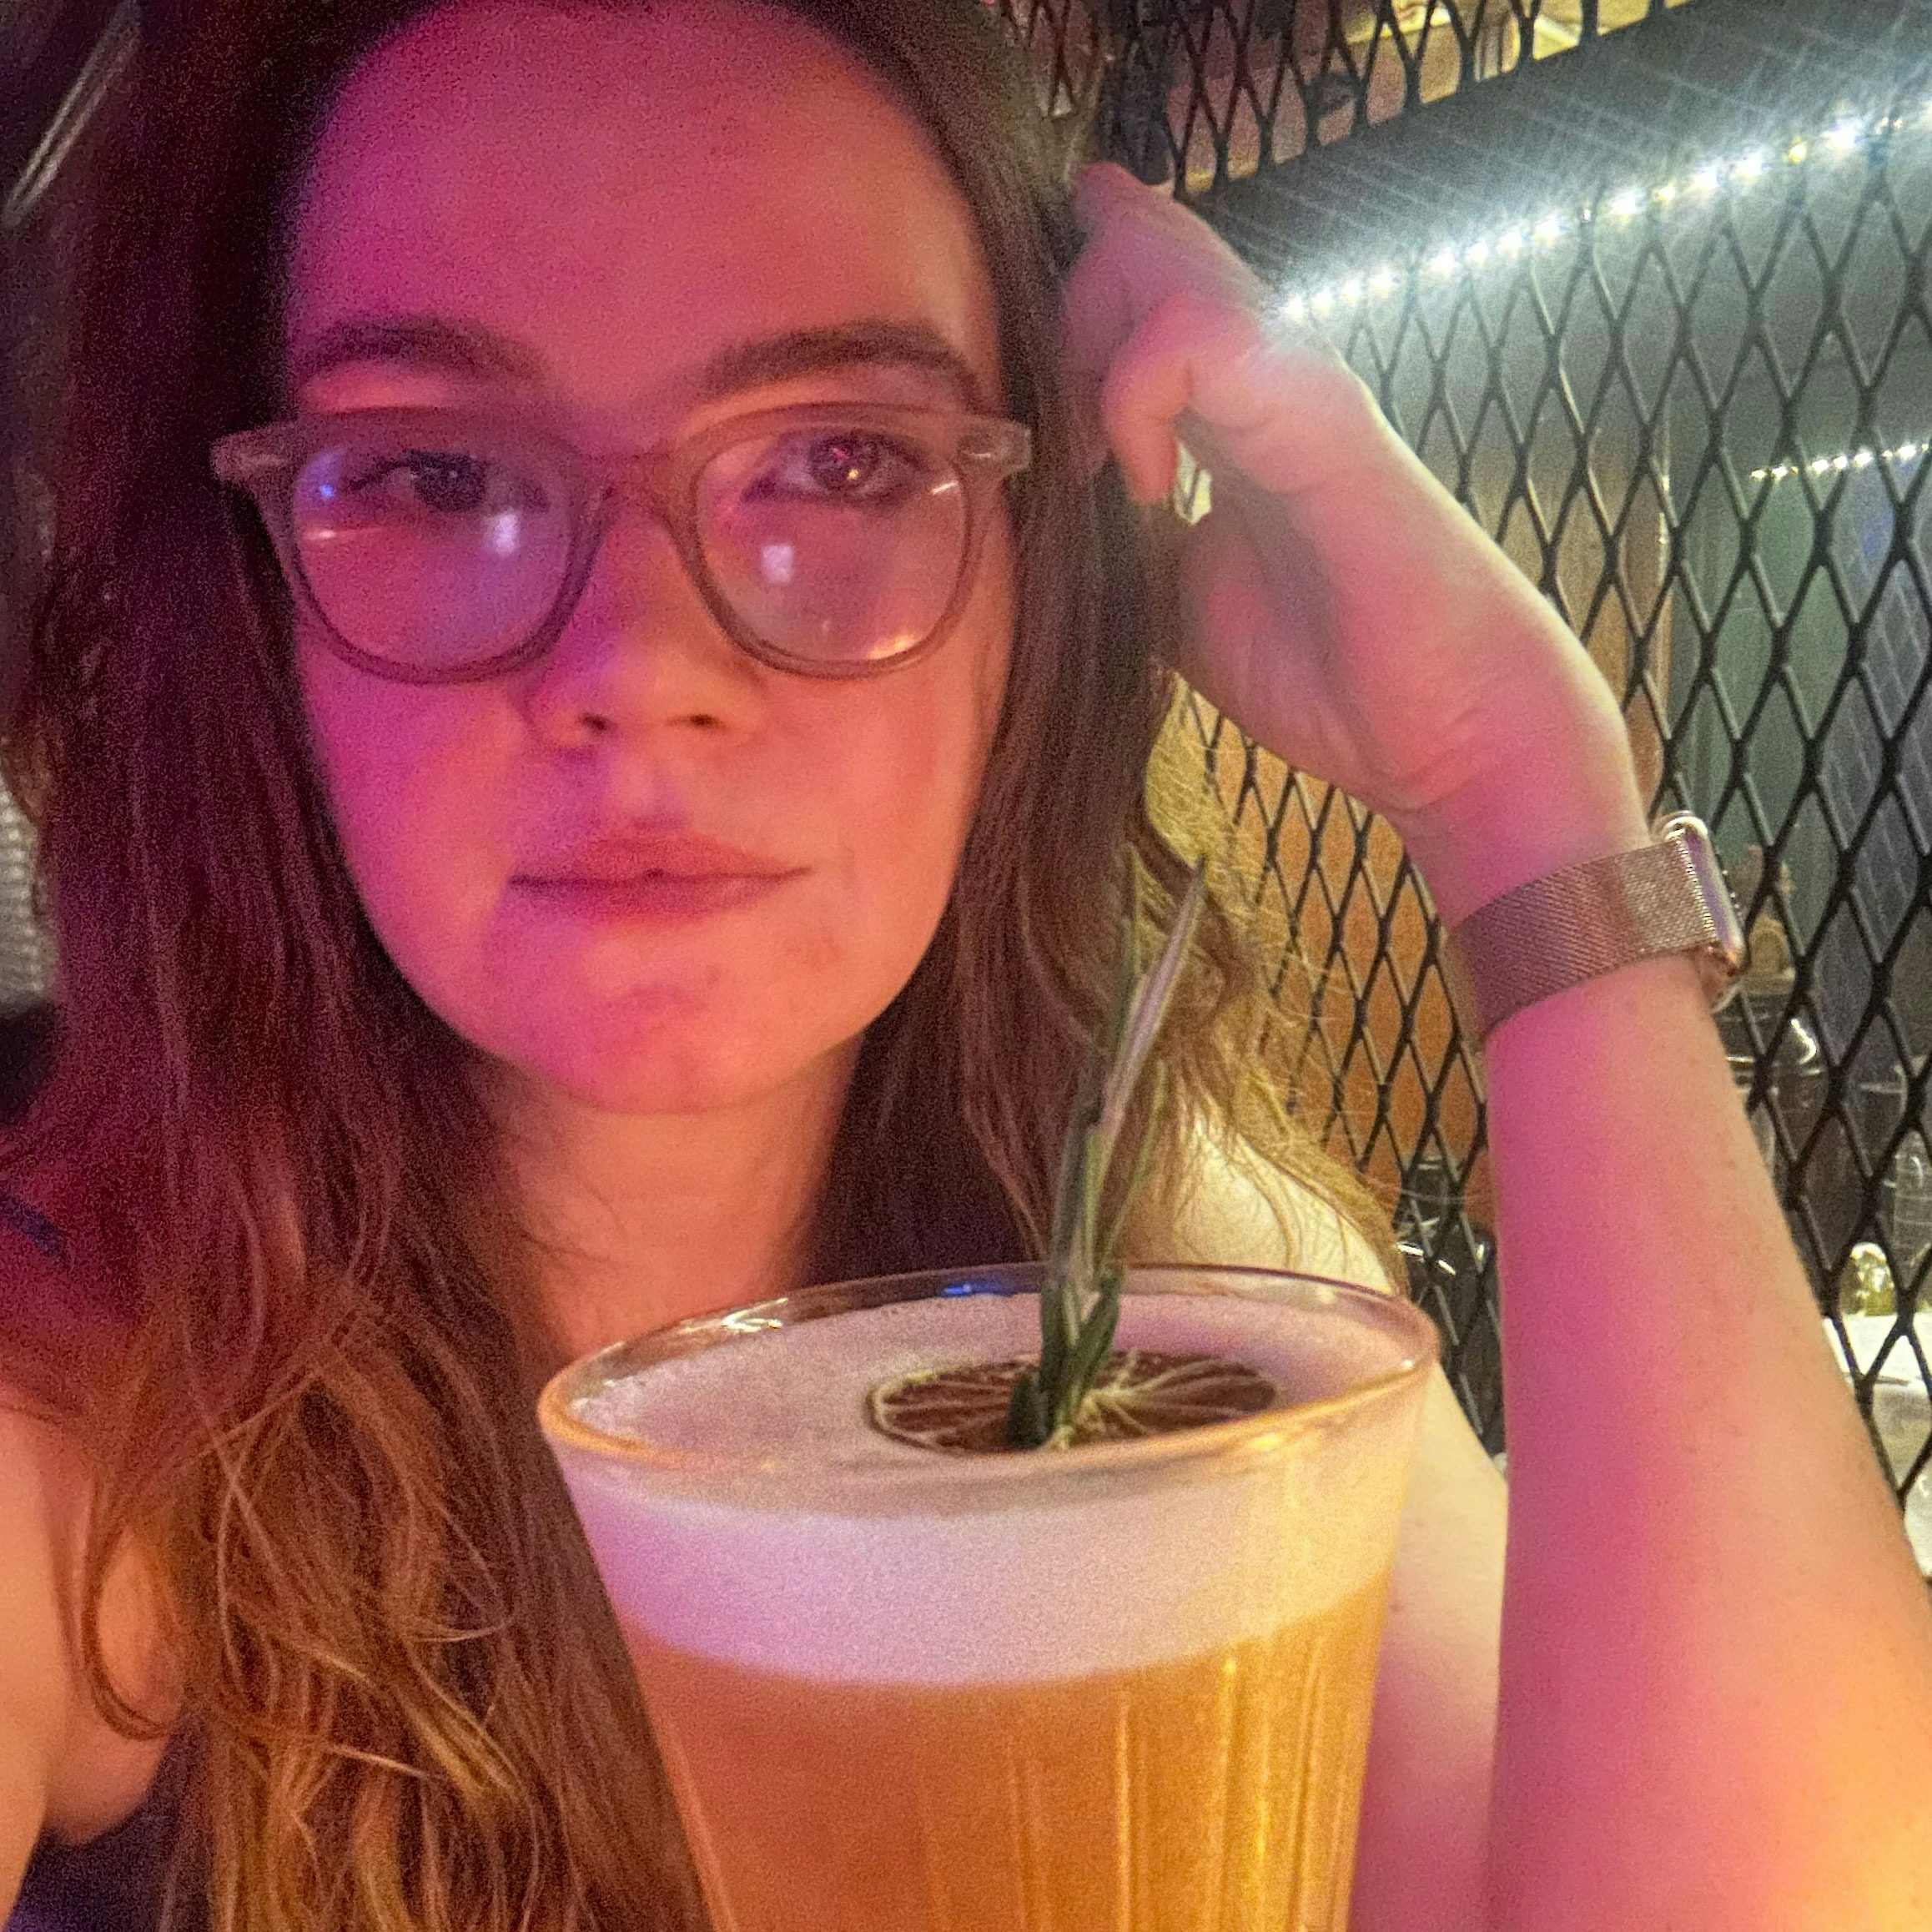 Picture of Megan having a drink